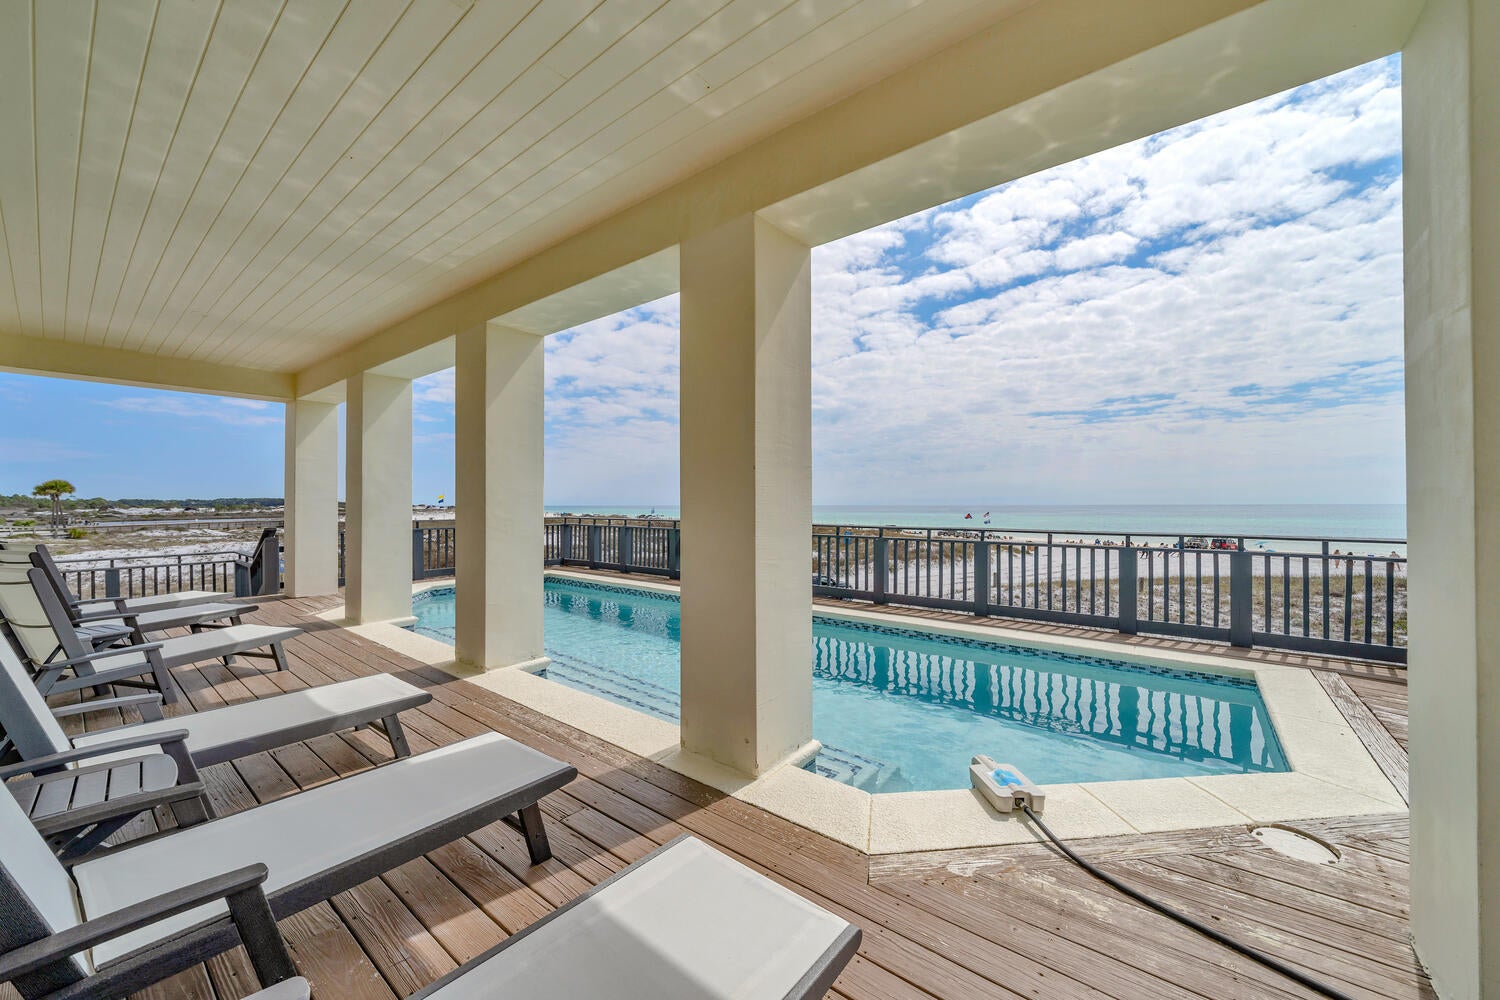 Step out to the pool deck!